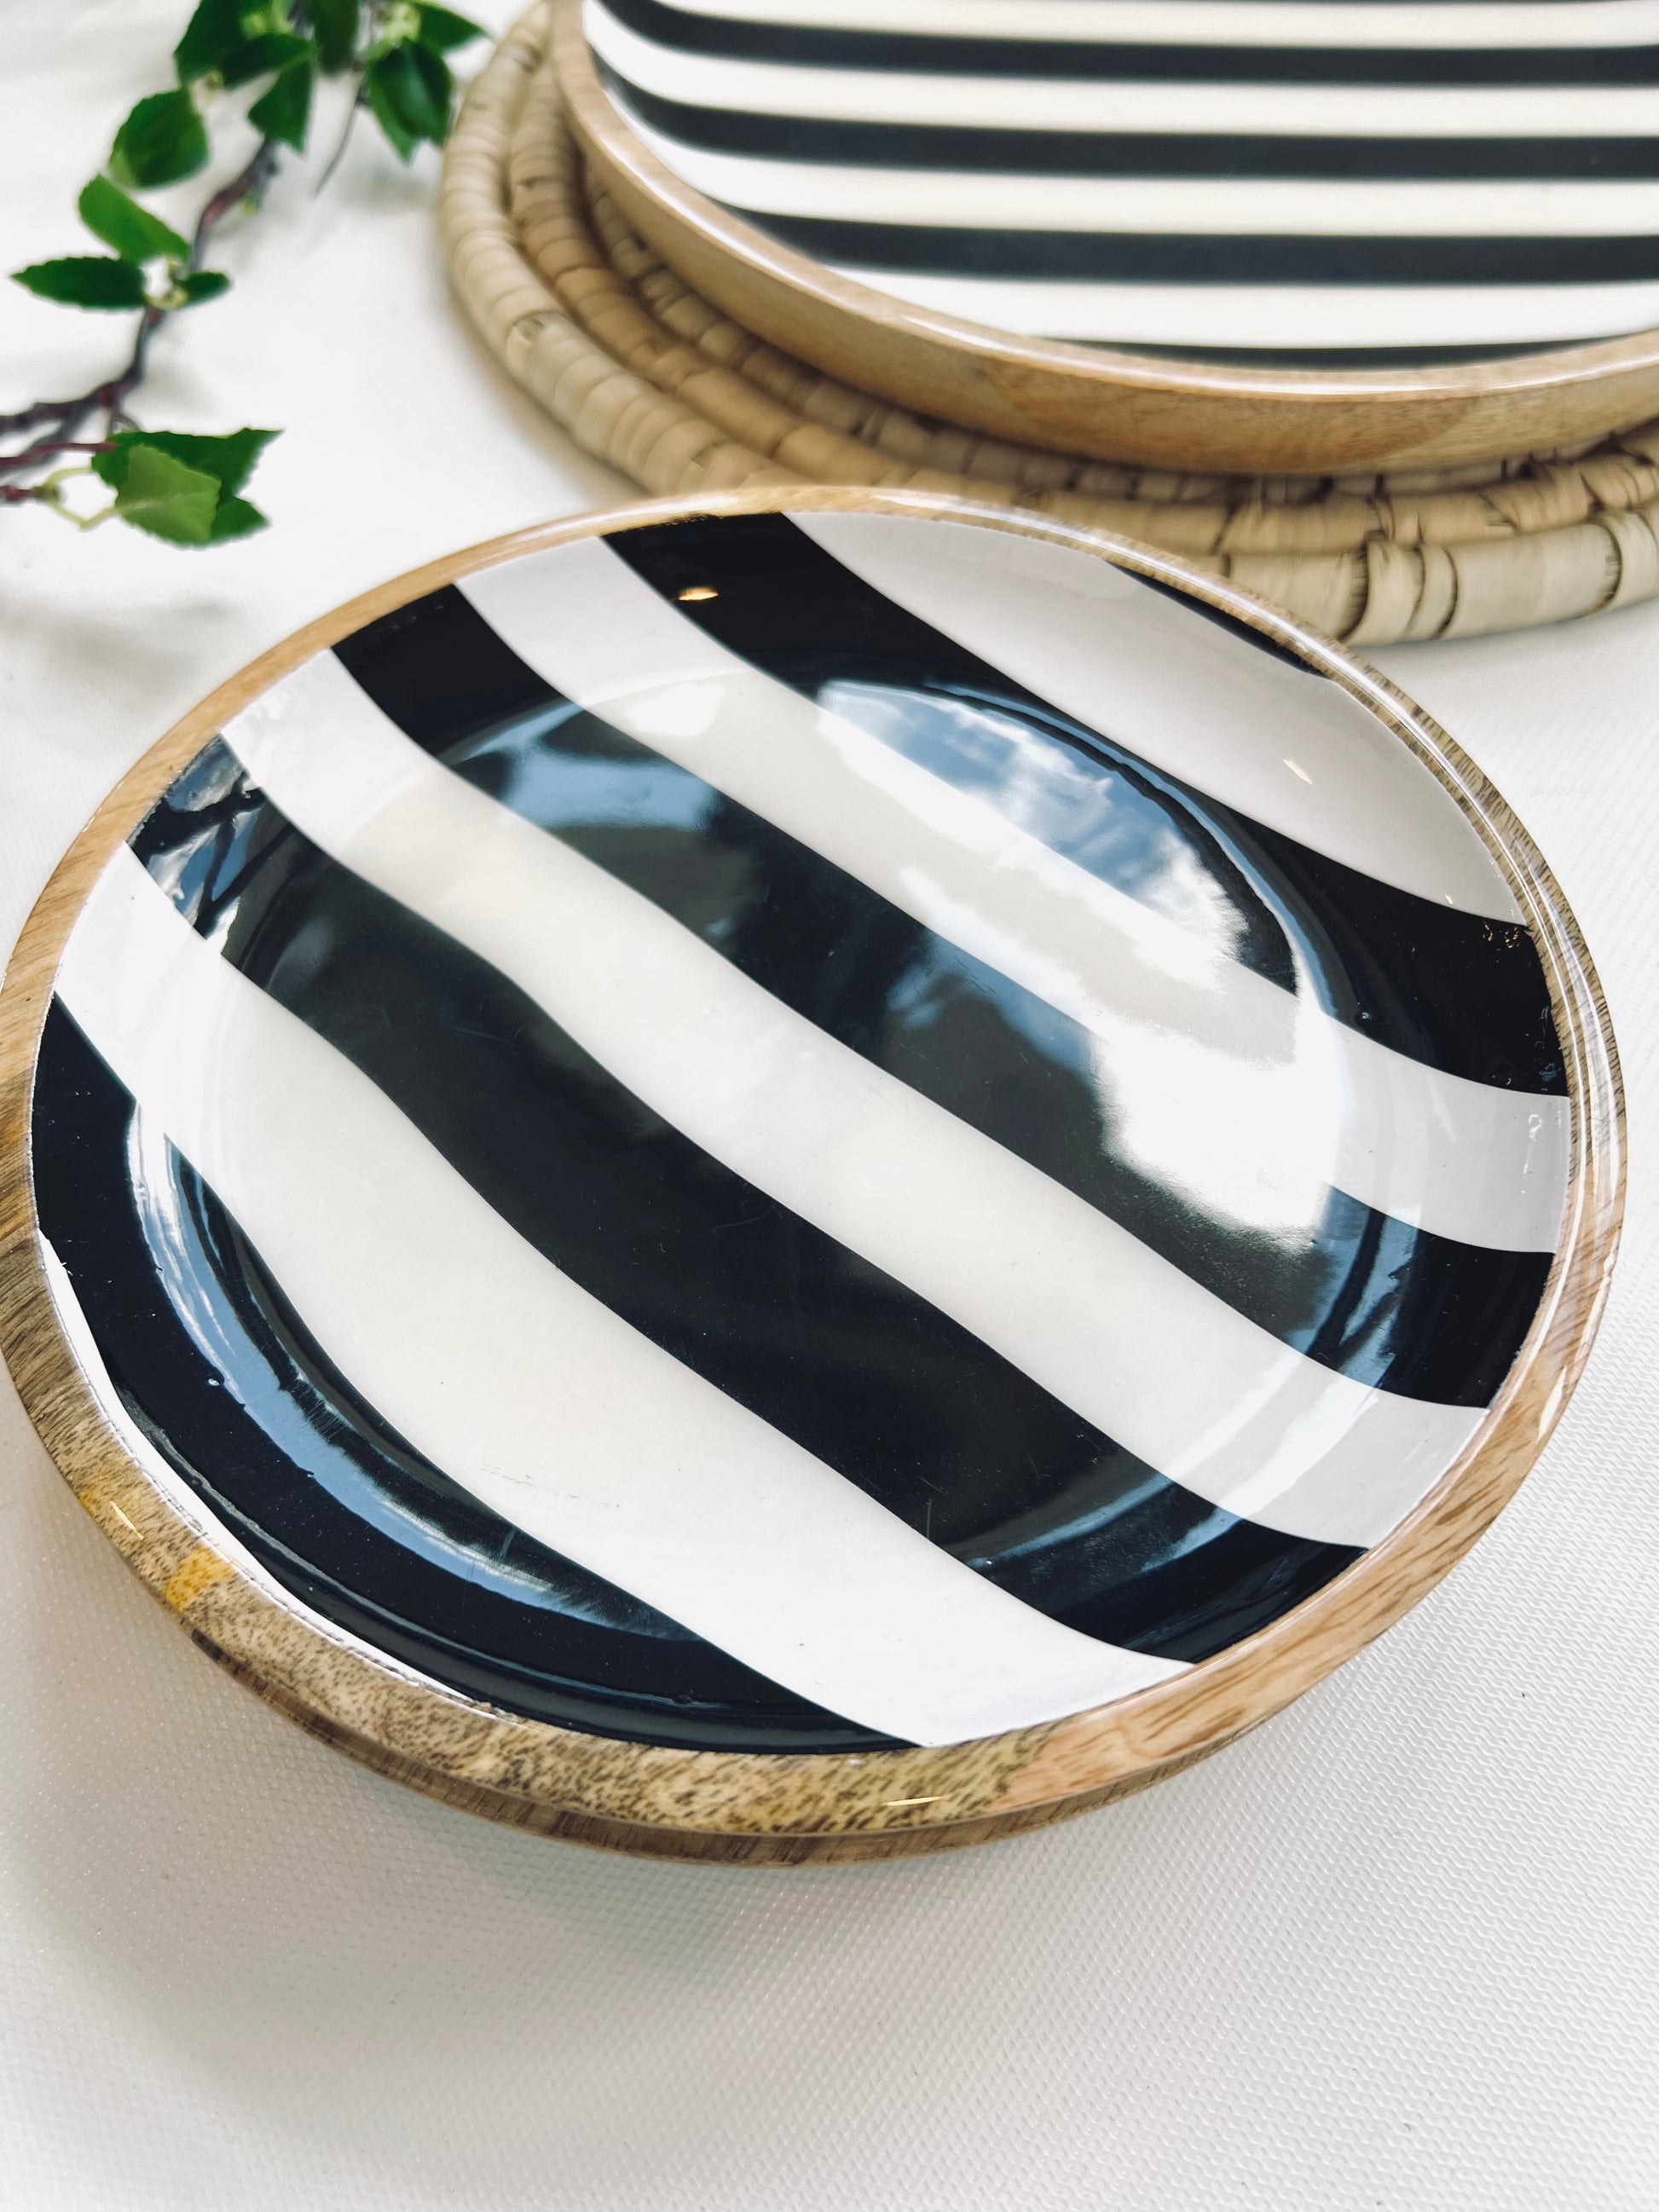 K&K Interiors Set of 2 Wooden Black and White Striped Plates with Enamel Inside